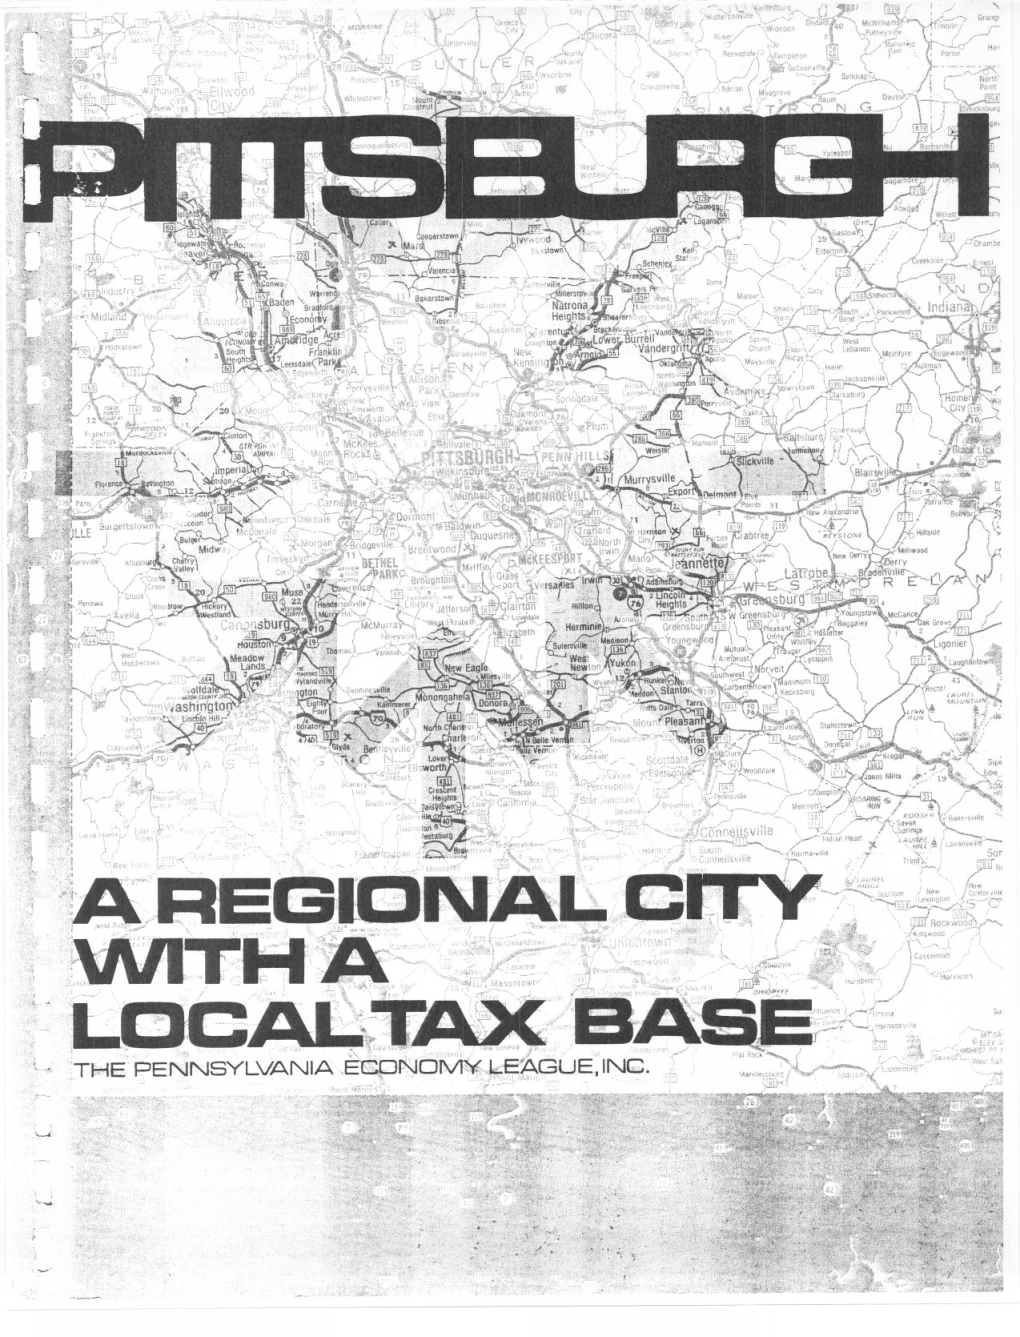 Pittsburgh: a Regional City with a Local Tax Base